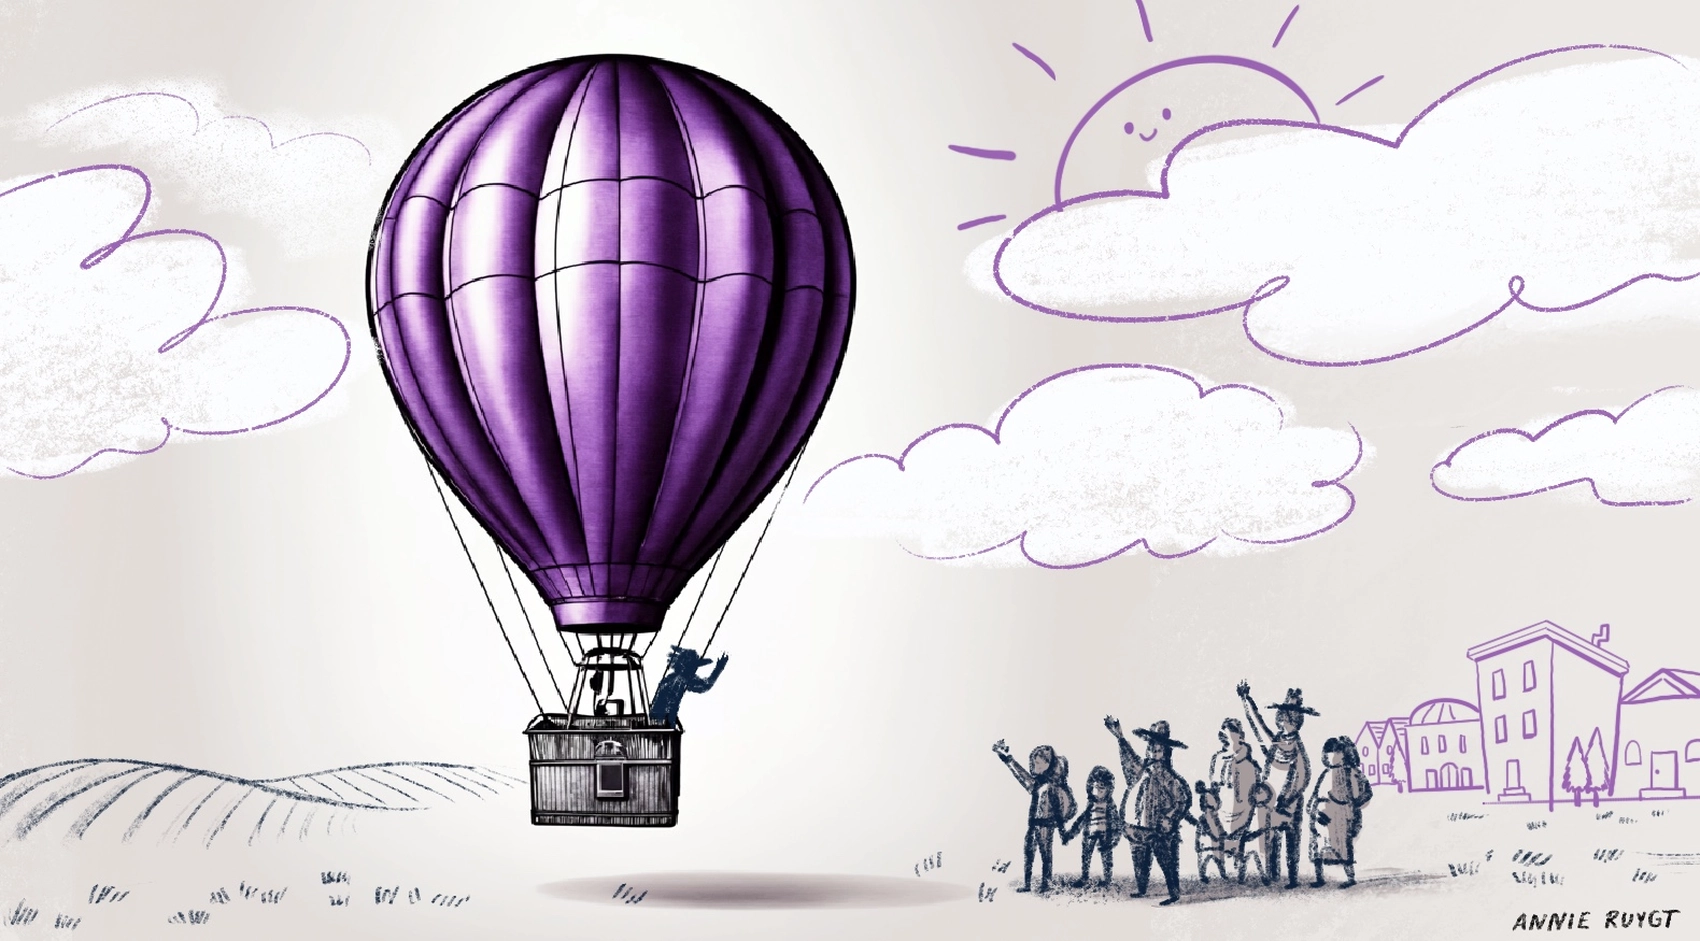 A cartoon illustration of a purple hot-air ballon taking off with bird man waving goodbye to a crowd of people. The hot-air balloon was created using Stable Diffusion and incorporated into the illustration.